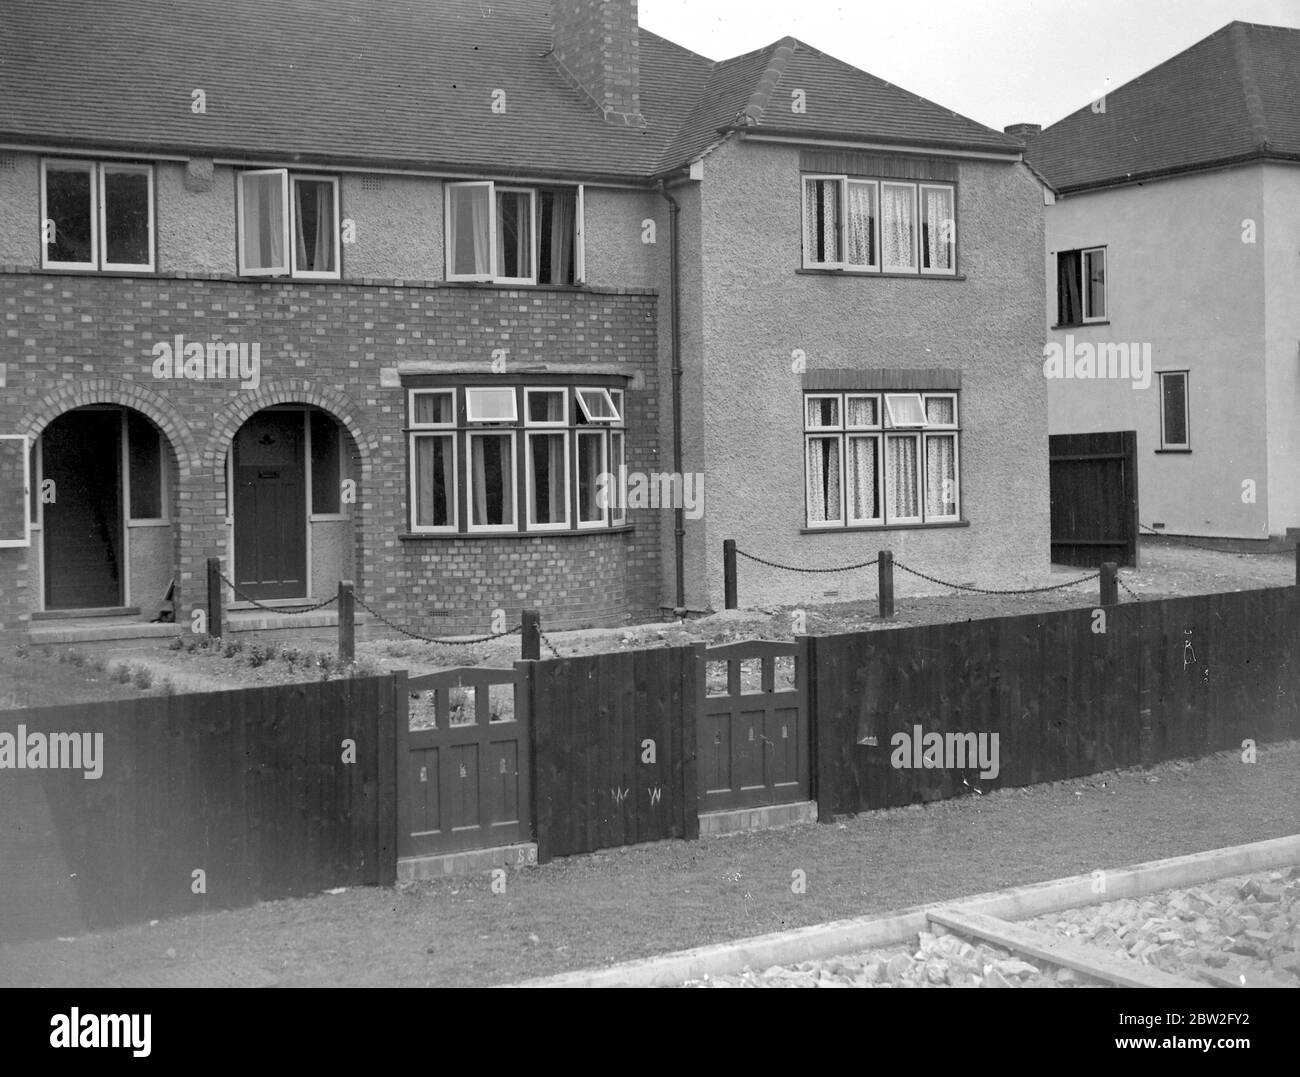 Maidstone kent houses Black and White Stock Photos & Images - Alamy